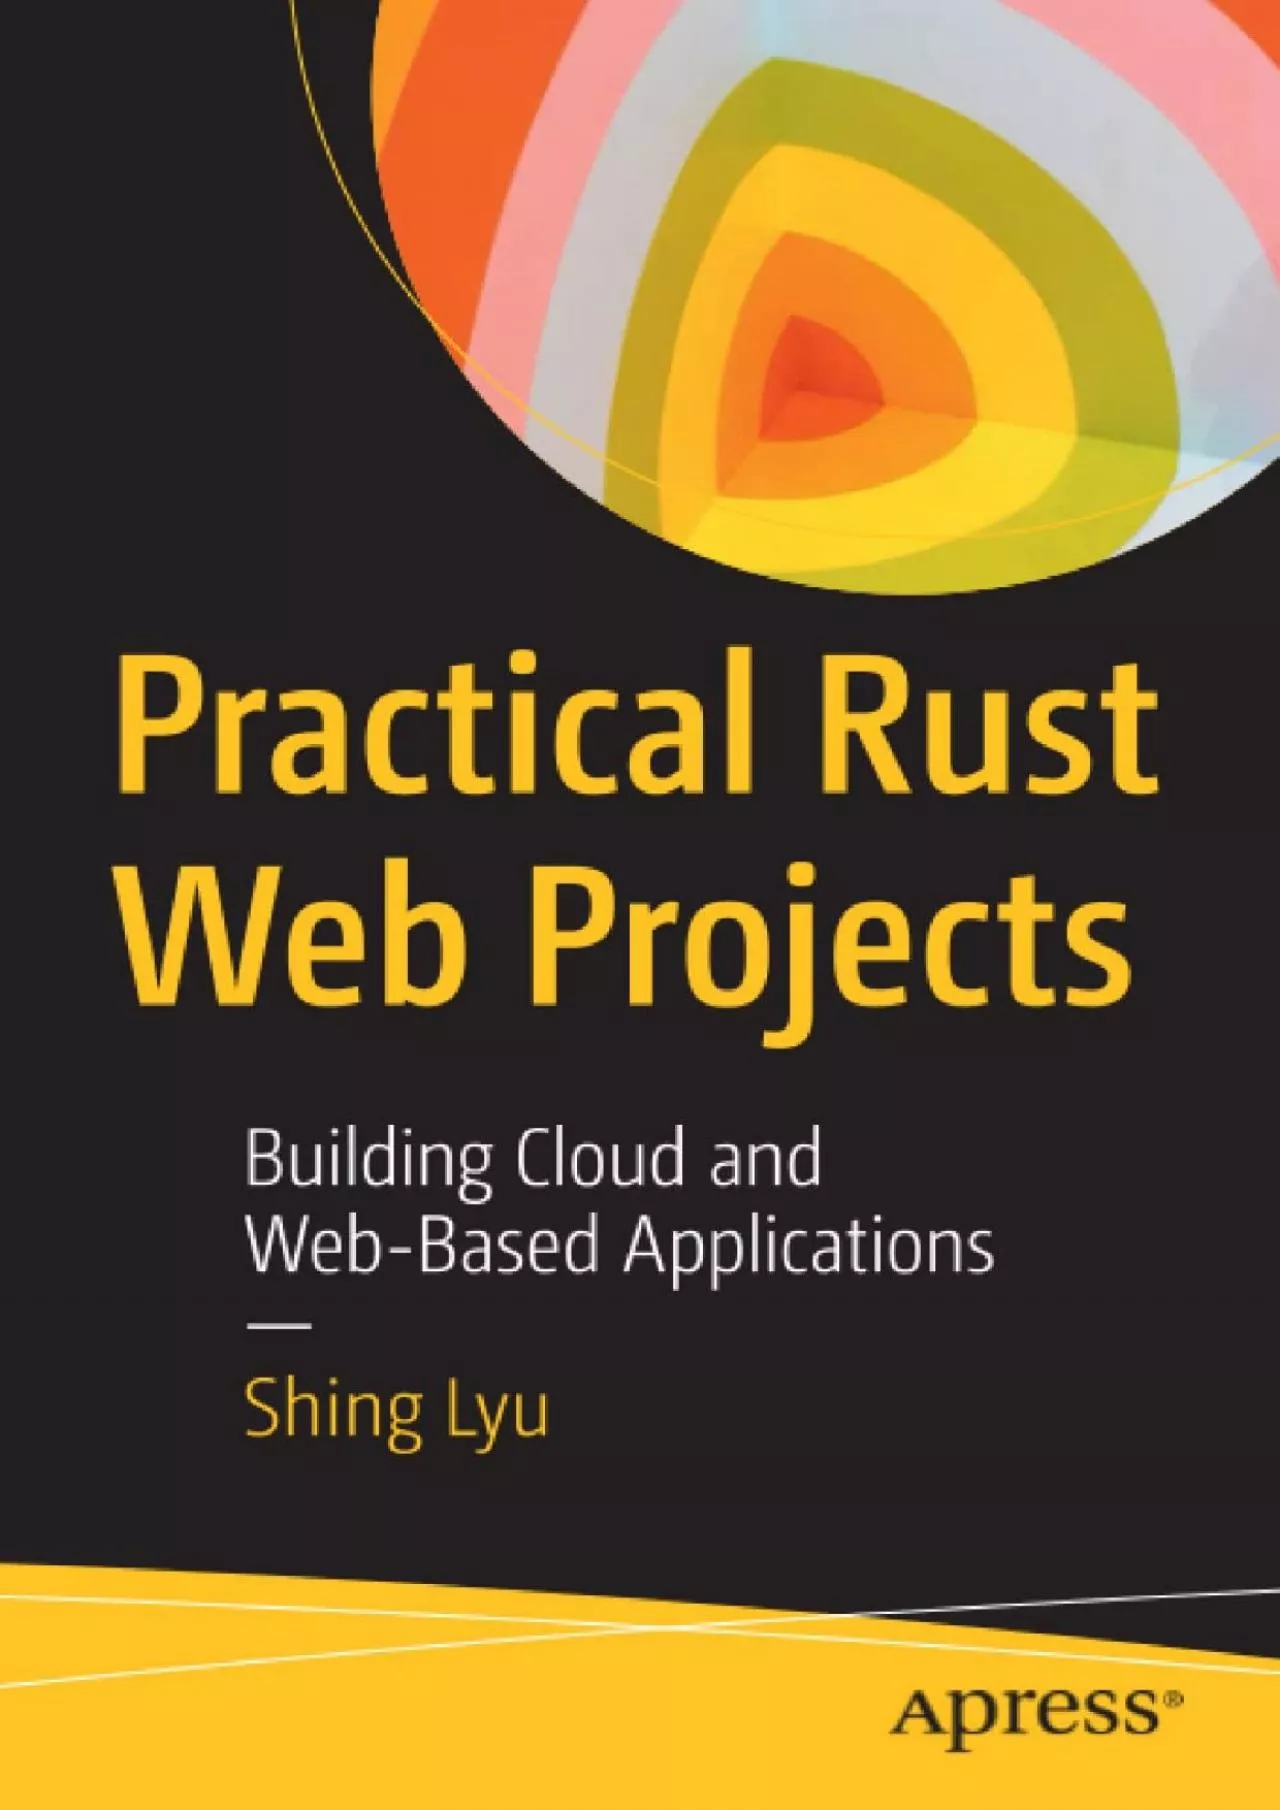 [DOWLOAD]-Practical Rust Web Projects: Building Cloud and Web-Based Applications